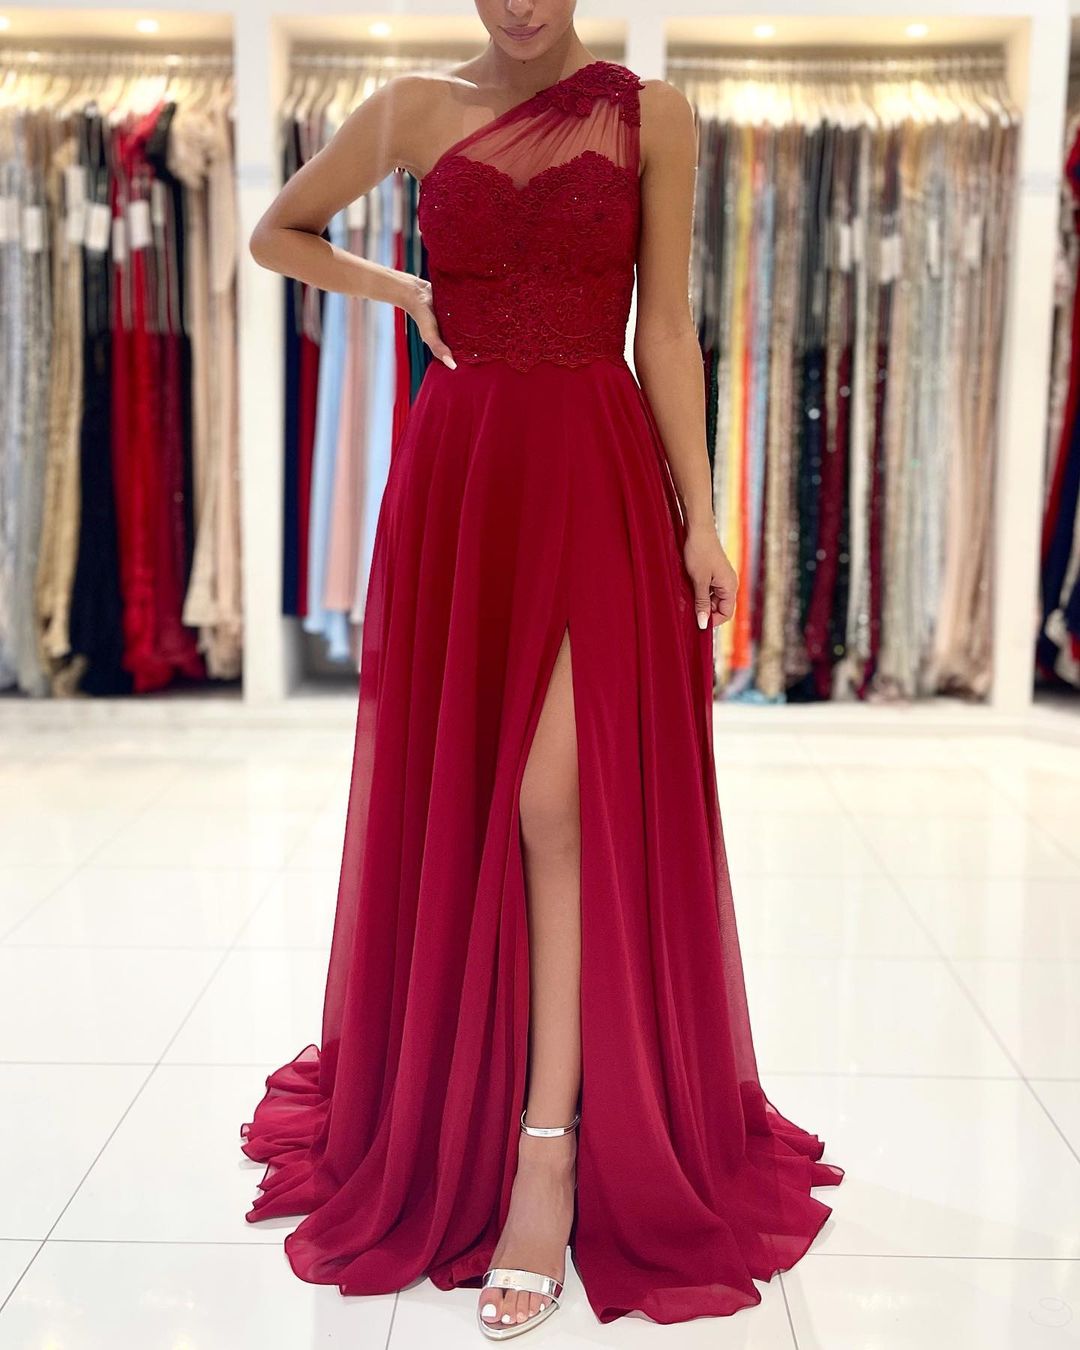 One SHoulder Red Prom Dress Floor Length Sleeveless Maxi Dress with Front Slit